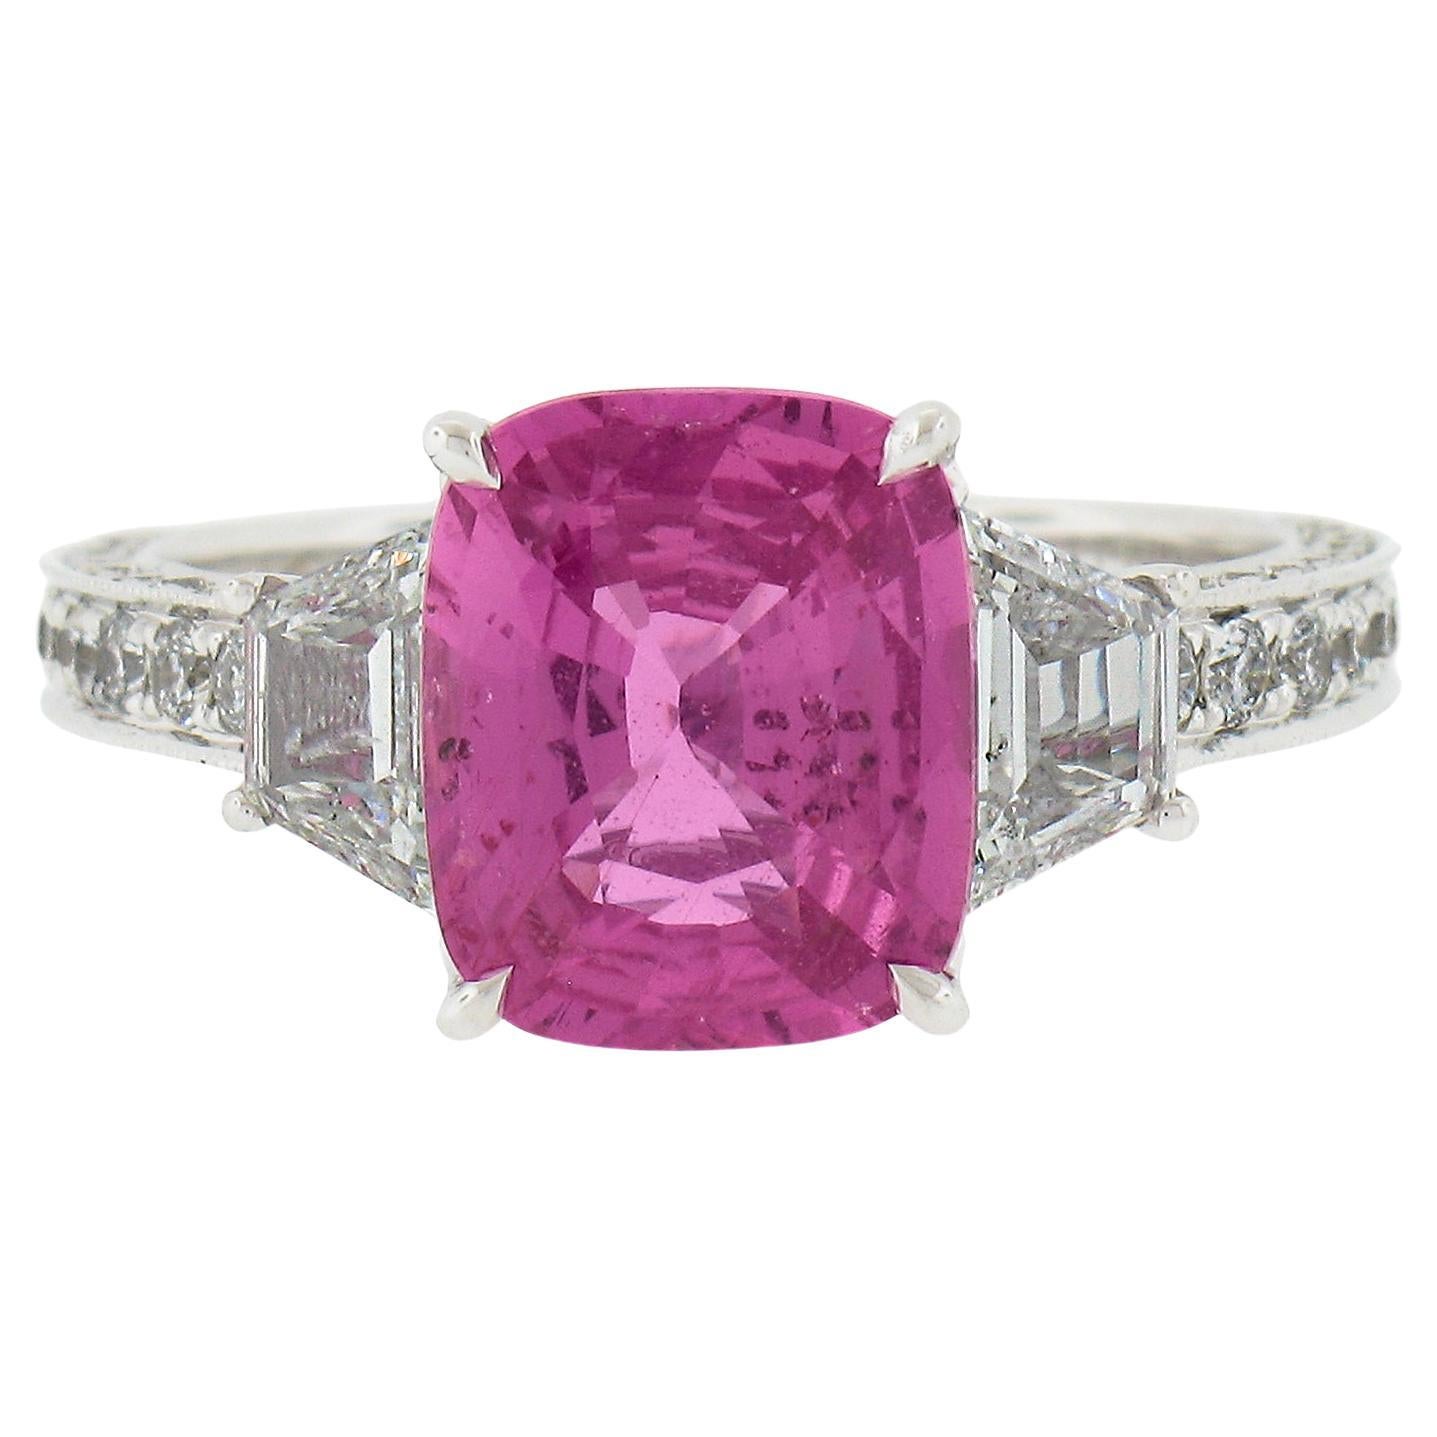 NEW 18K Gold 4.53ctw GIA Cushion Cut Pink Sapphire & Diamond Engagement Ring For Sale